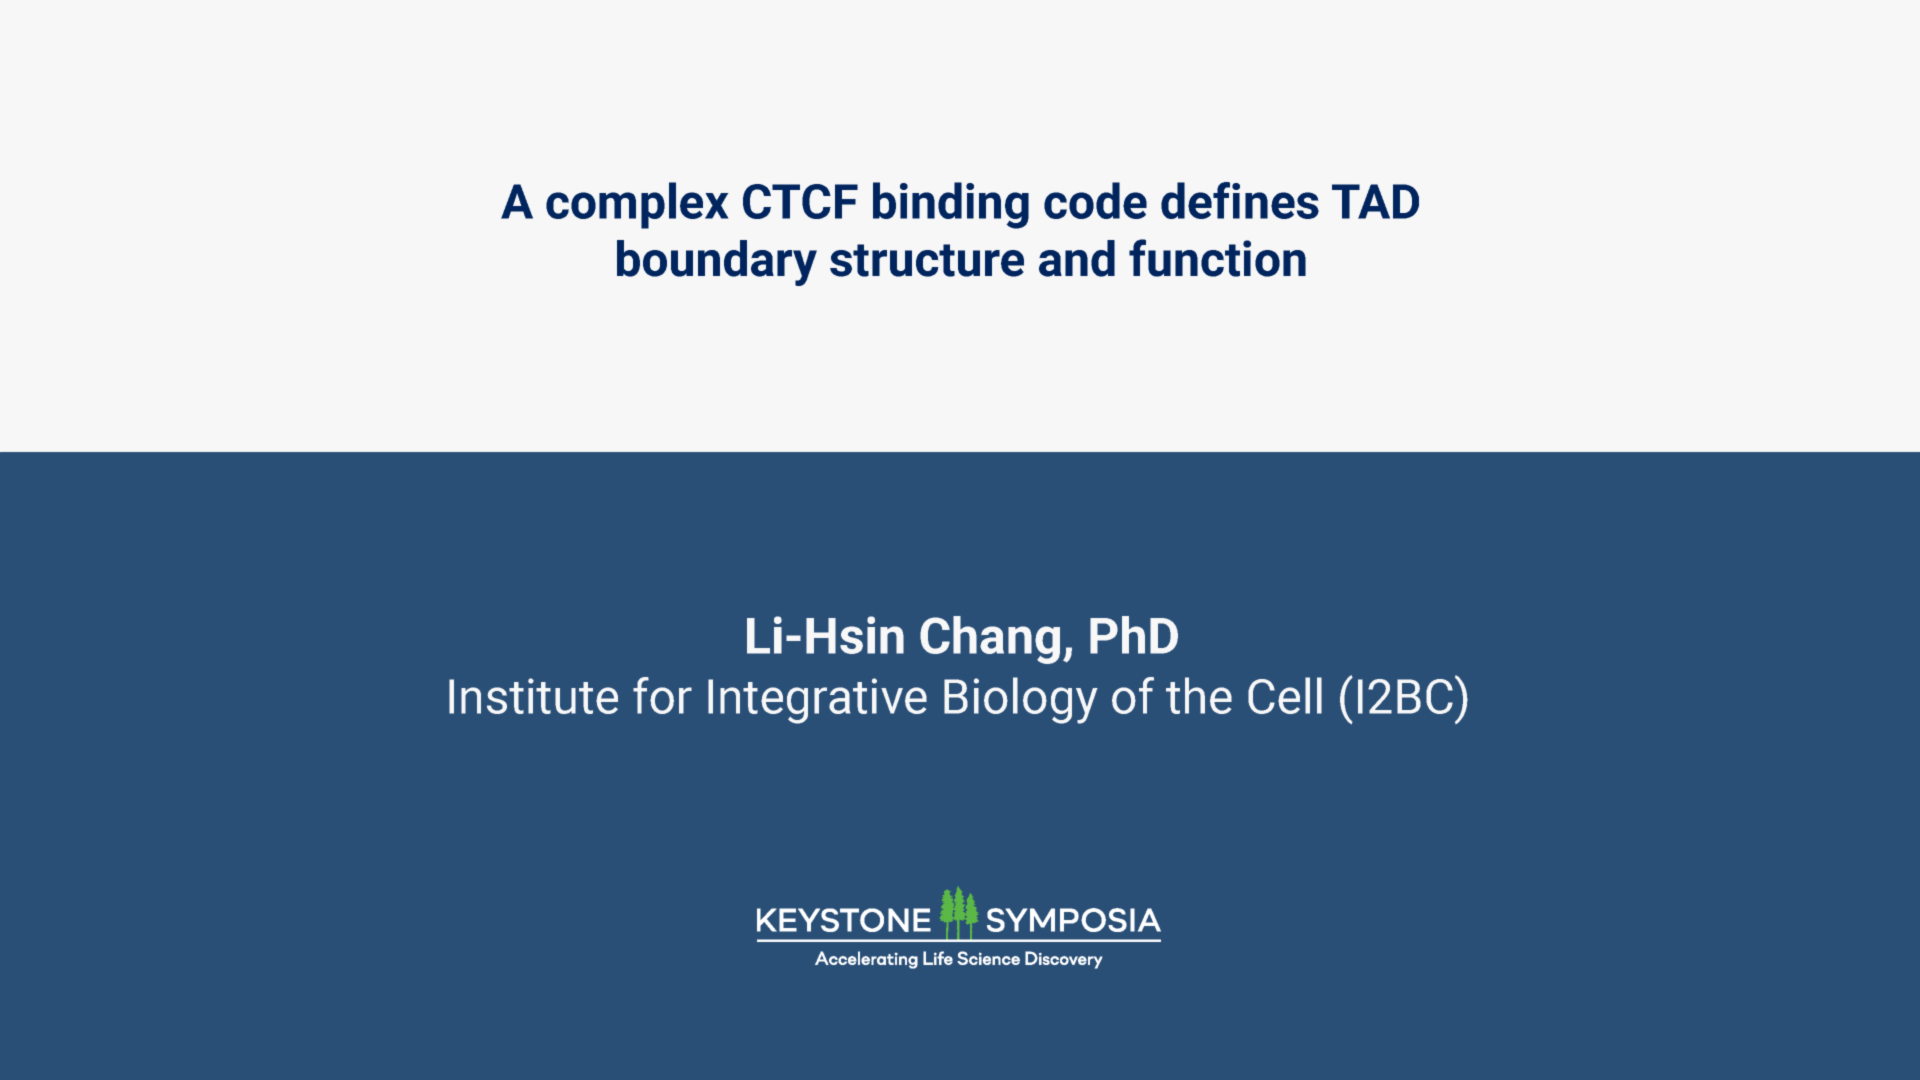 A complex CTCF binding code defines TAD boundary structure and function icon